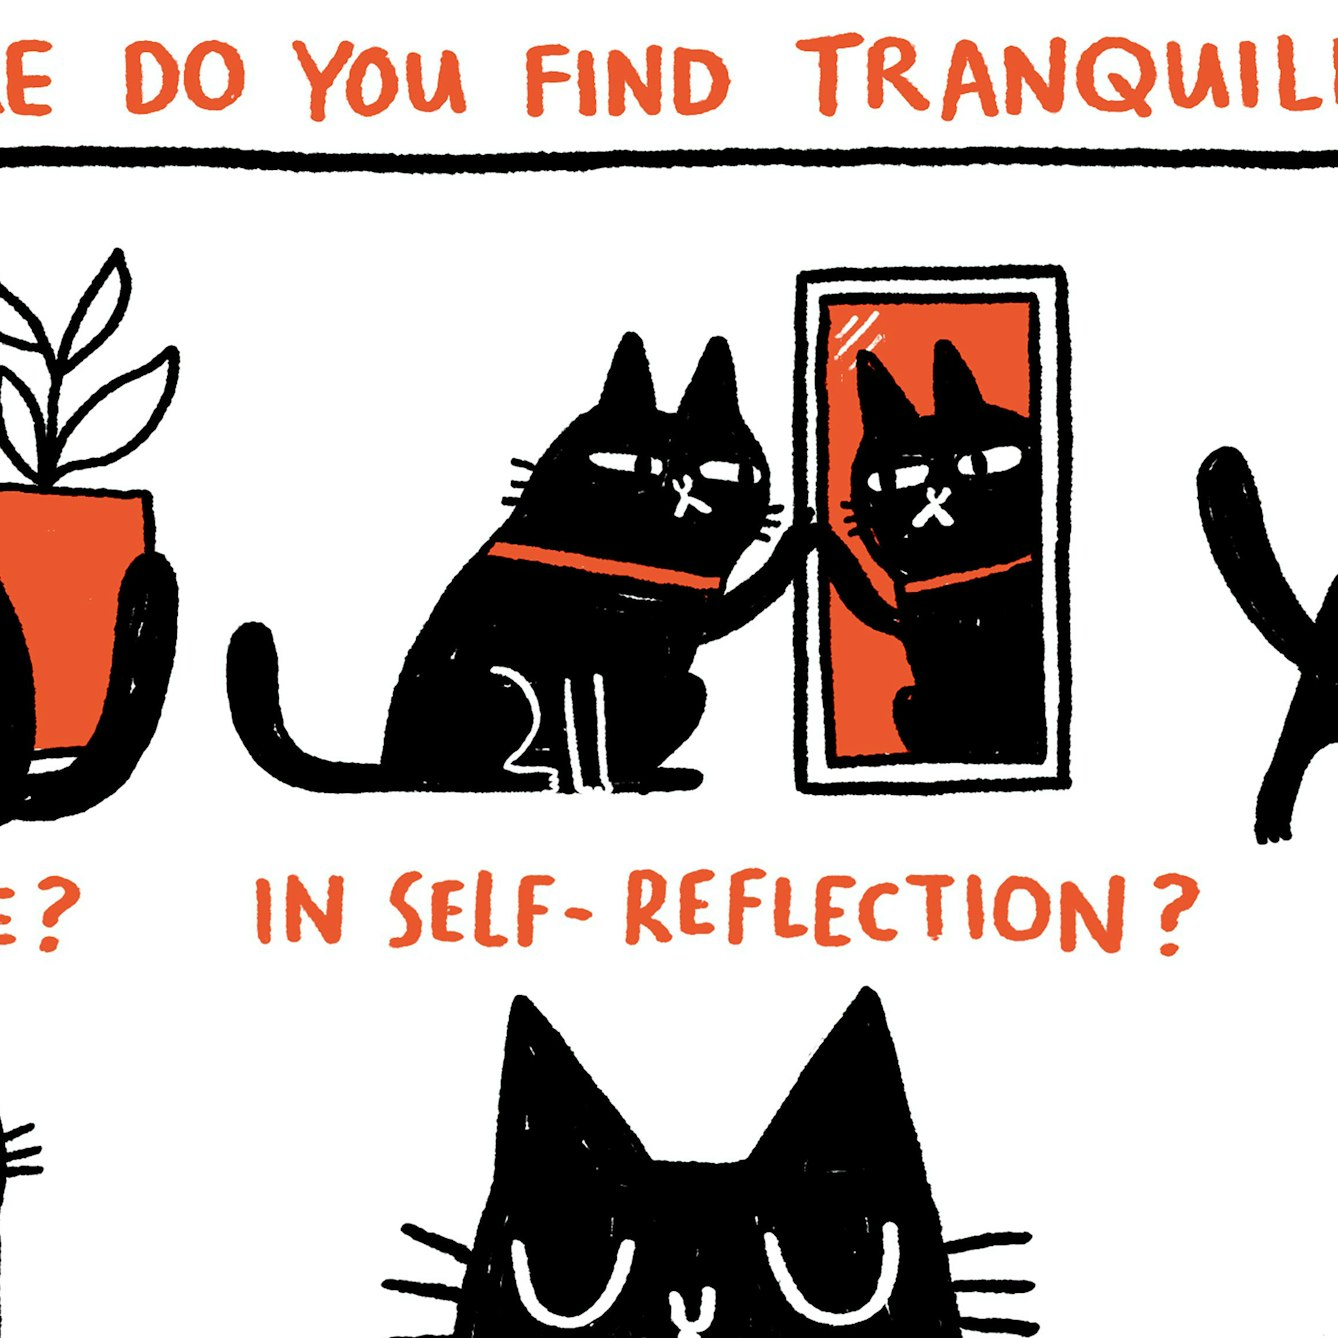 Title text reads “Where do you find tranquillity?”

A black Cat eating a plant, with a leaf in its mouth, text reads “In Nature?”

A black Cat looking at itself in the mirror, text reads “In self-reflection?”

A black Cat scratching a pattern, text reads “In art?”